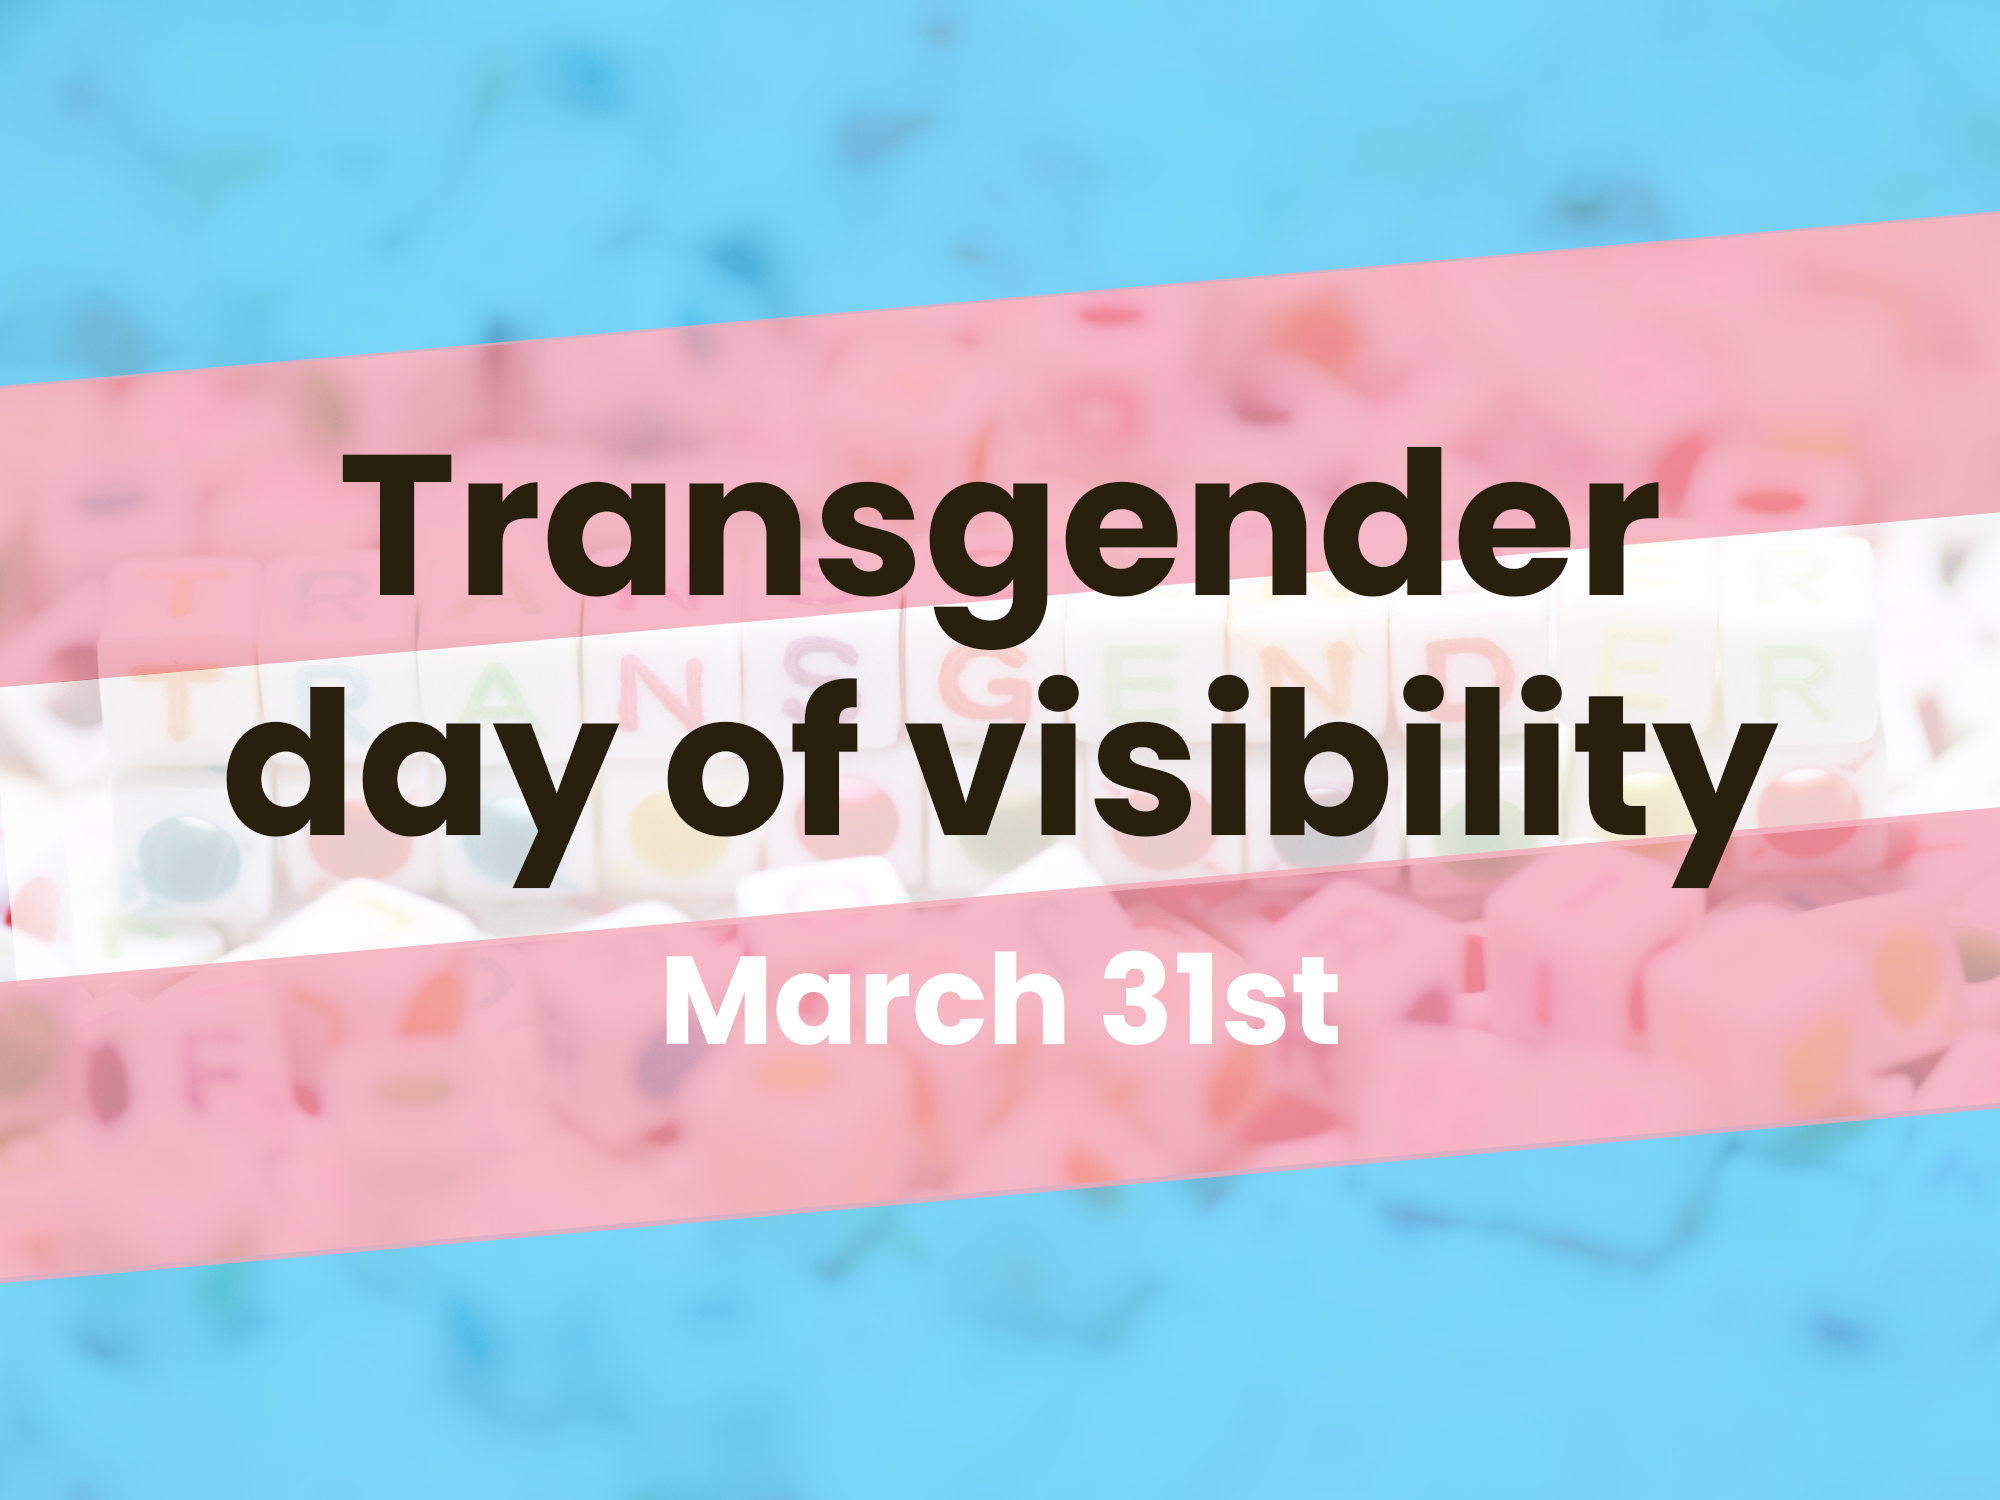 Montreal Careers | Why international day of trans visibility is important